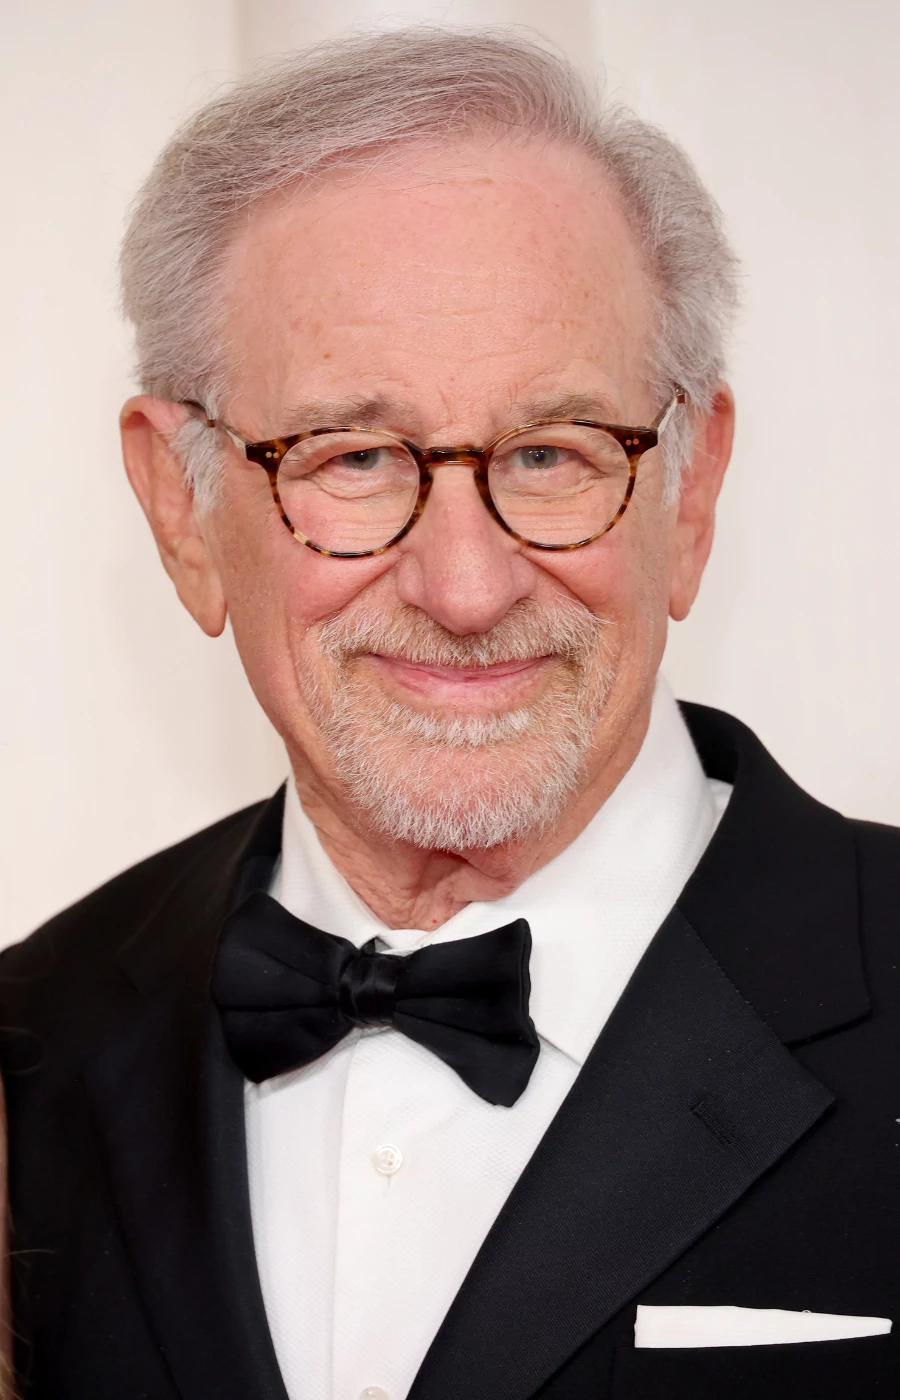 Steven Spielberg (Fot. Mike Coppola/Getty Images)